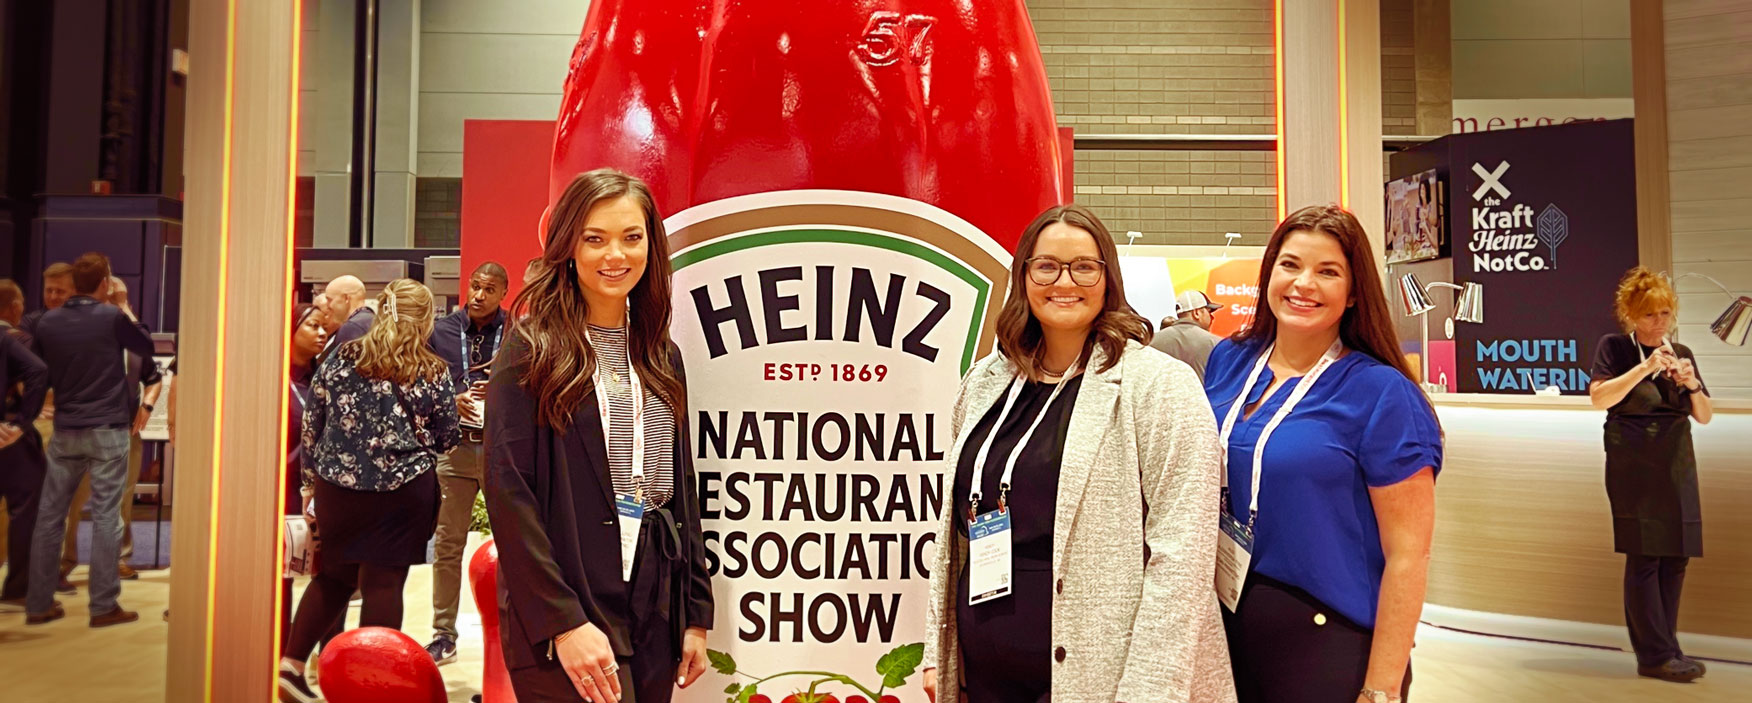 Three business women standing in front of a large Heinz ketchup display that says National Restaurant Association Show